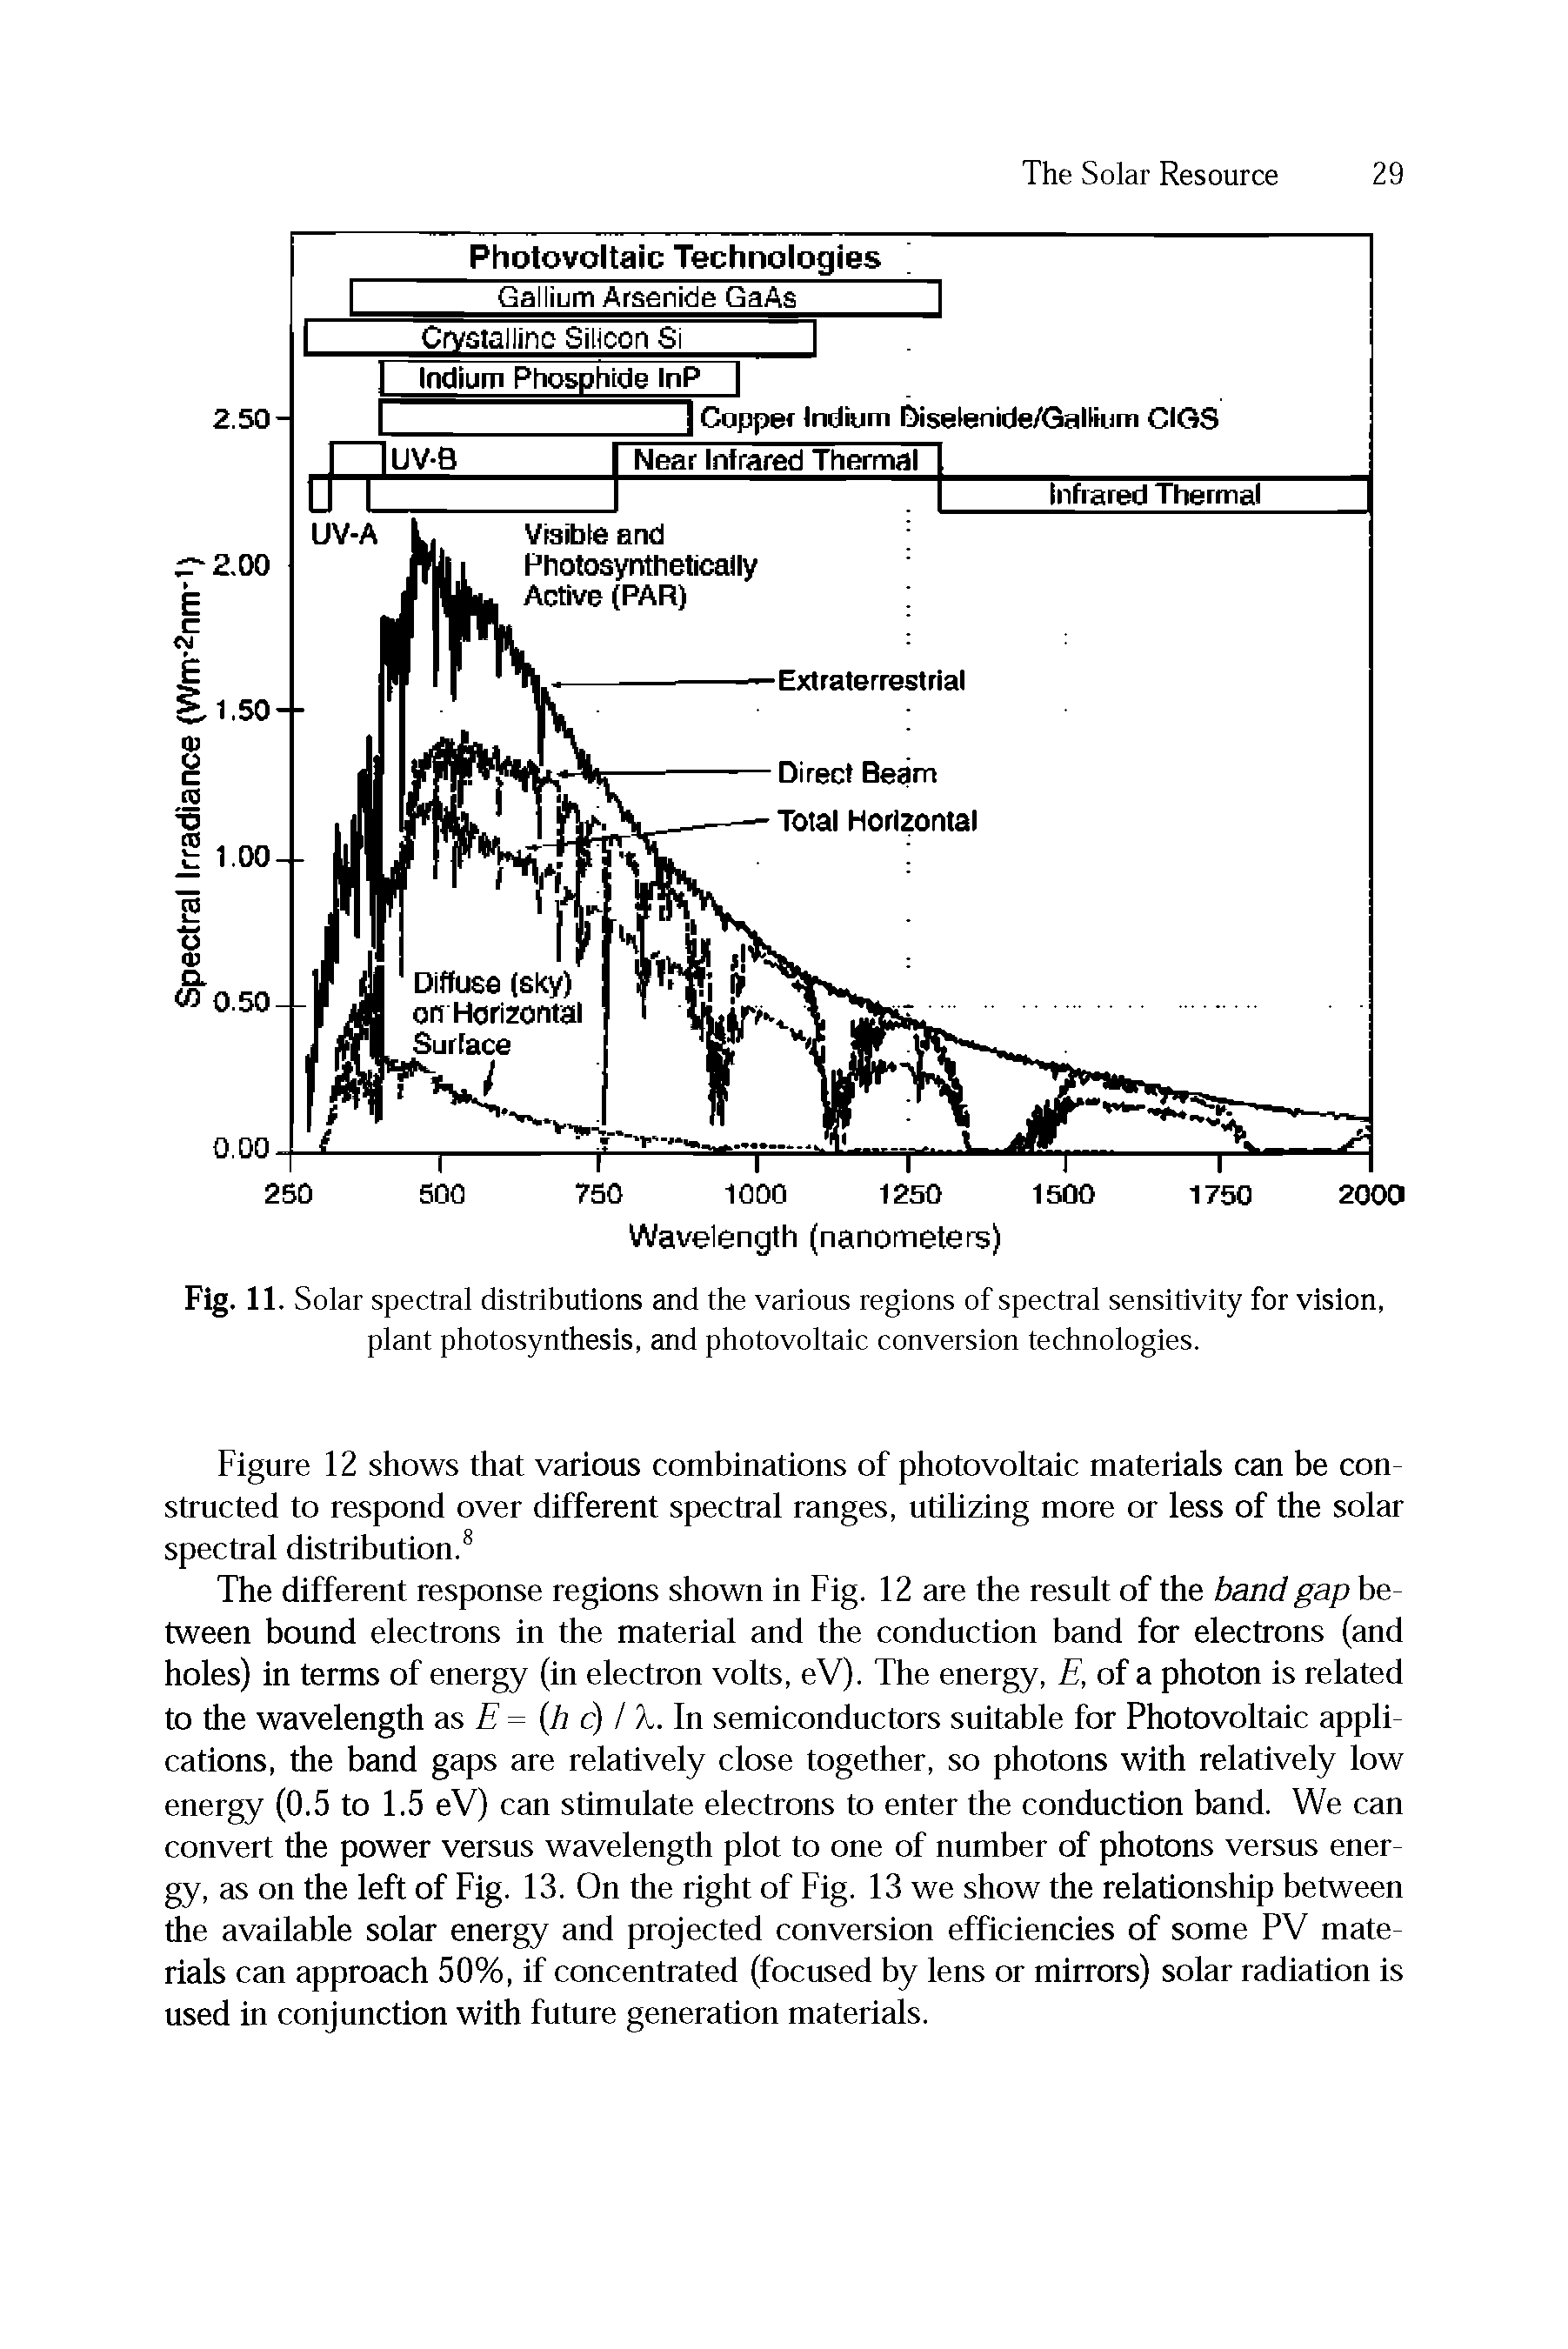 Fig. 11. Solar spectral distributions and the various regions of spectral sensitivity for vision, plant photosynthesis, and photovoltaic conversion technologies.